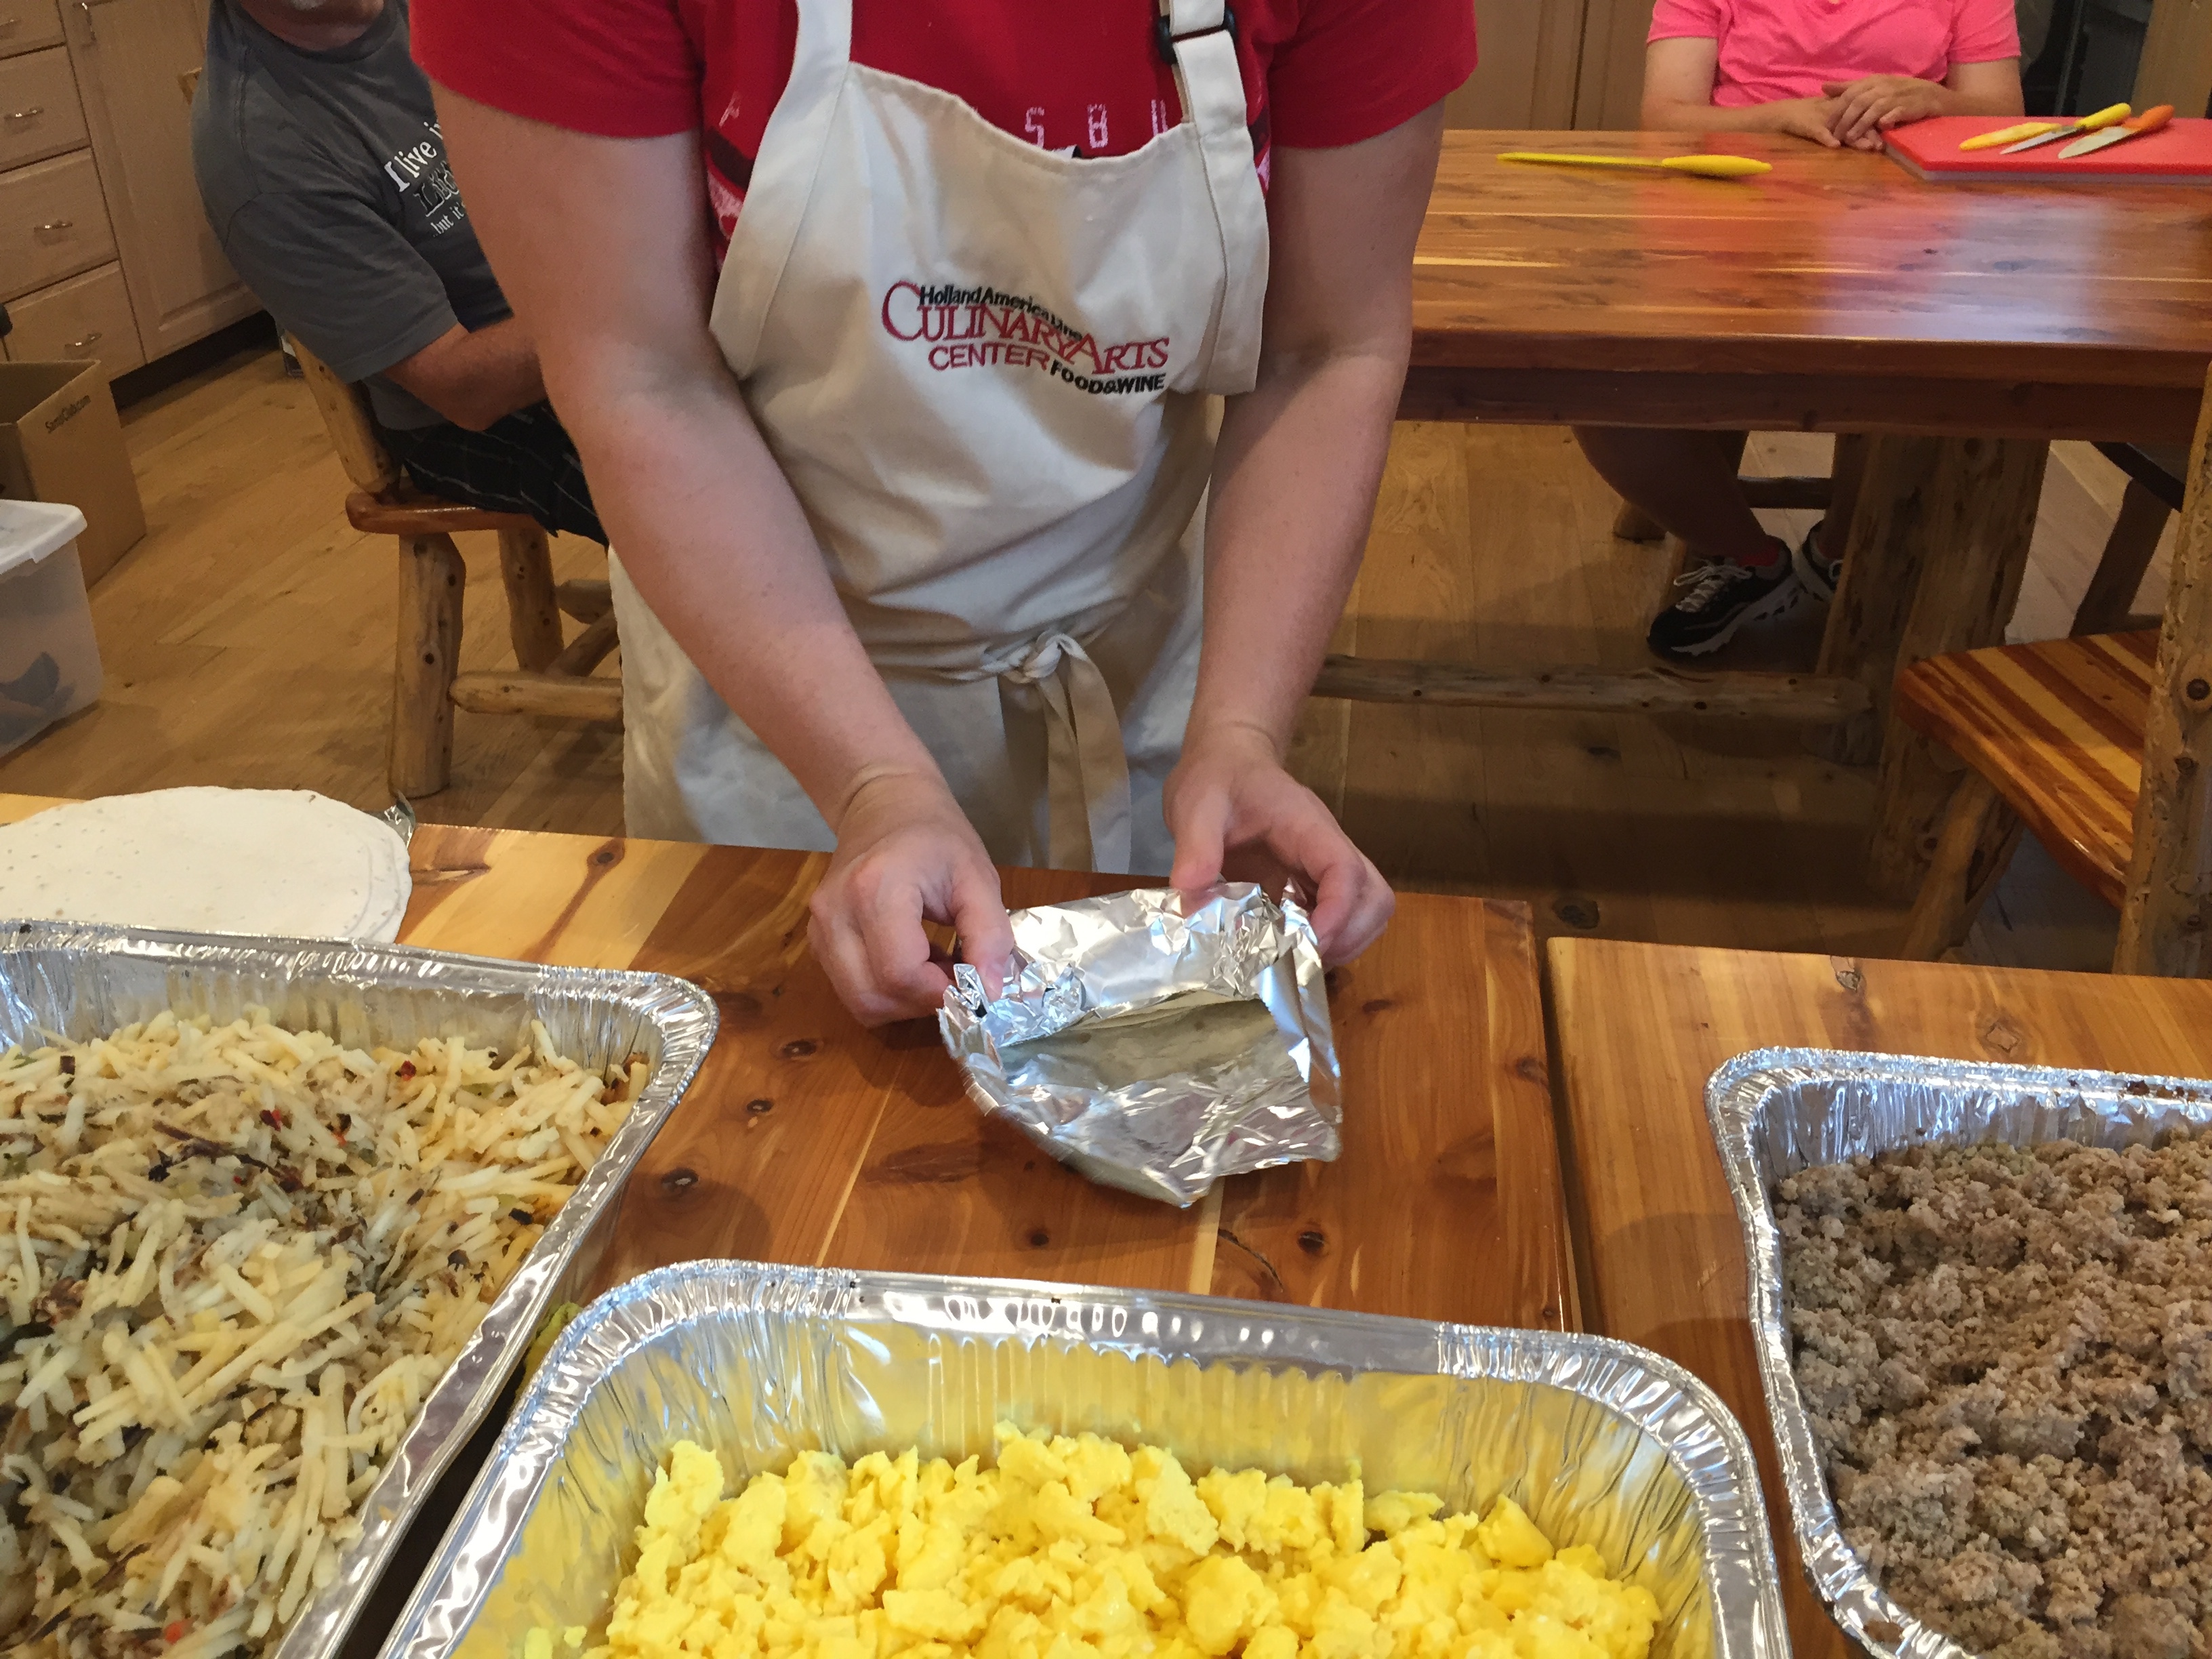 Breakfast Burritos for a Crowd